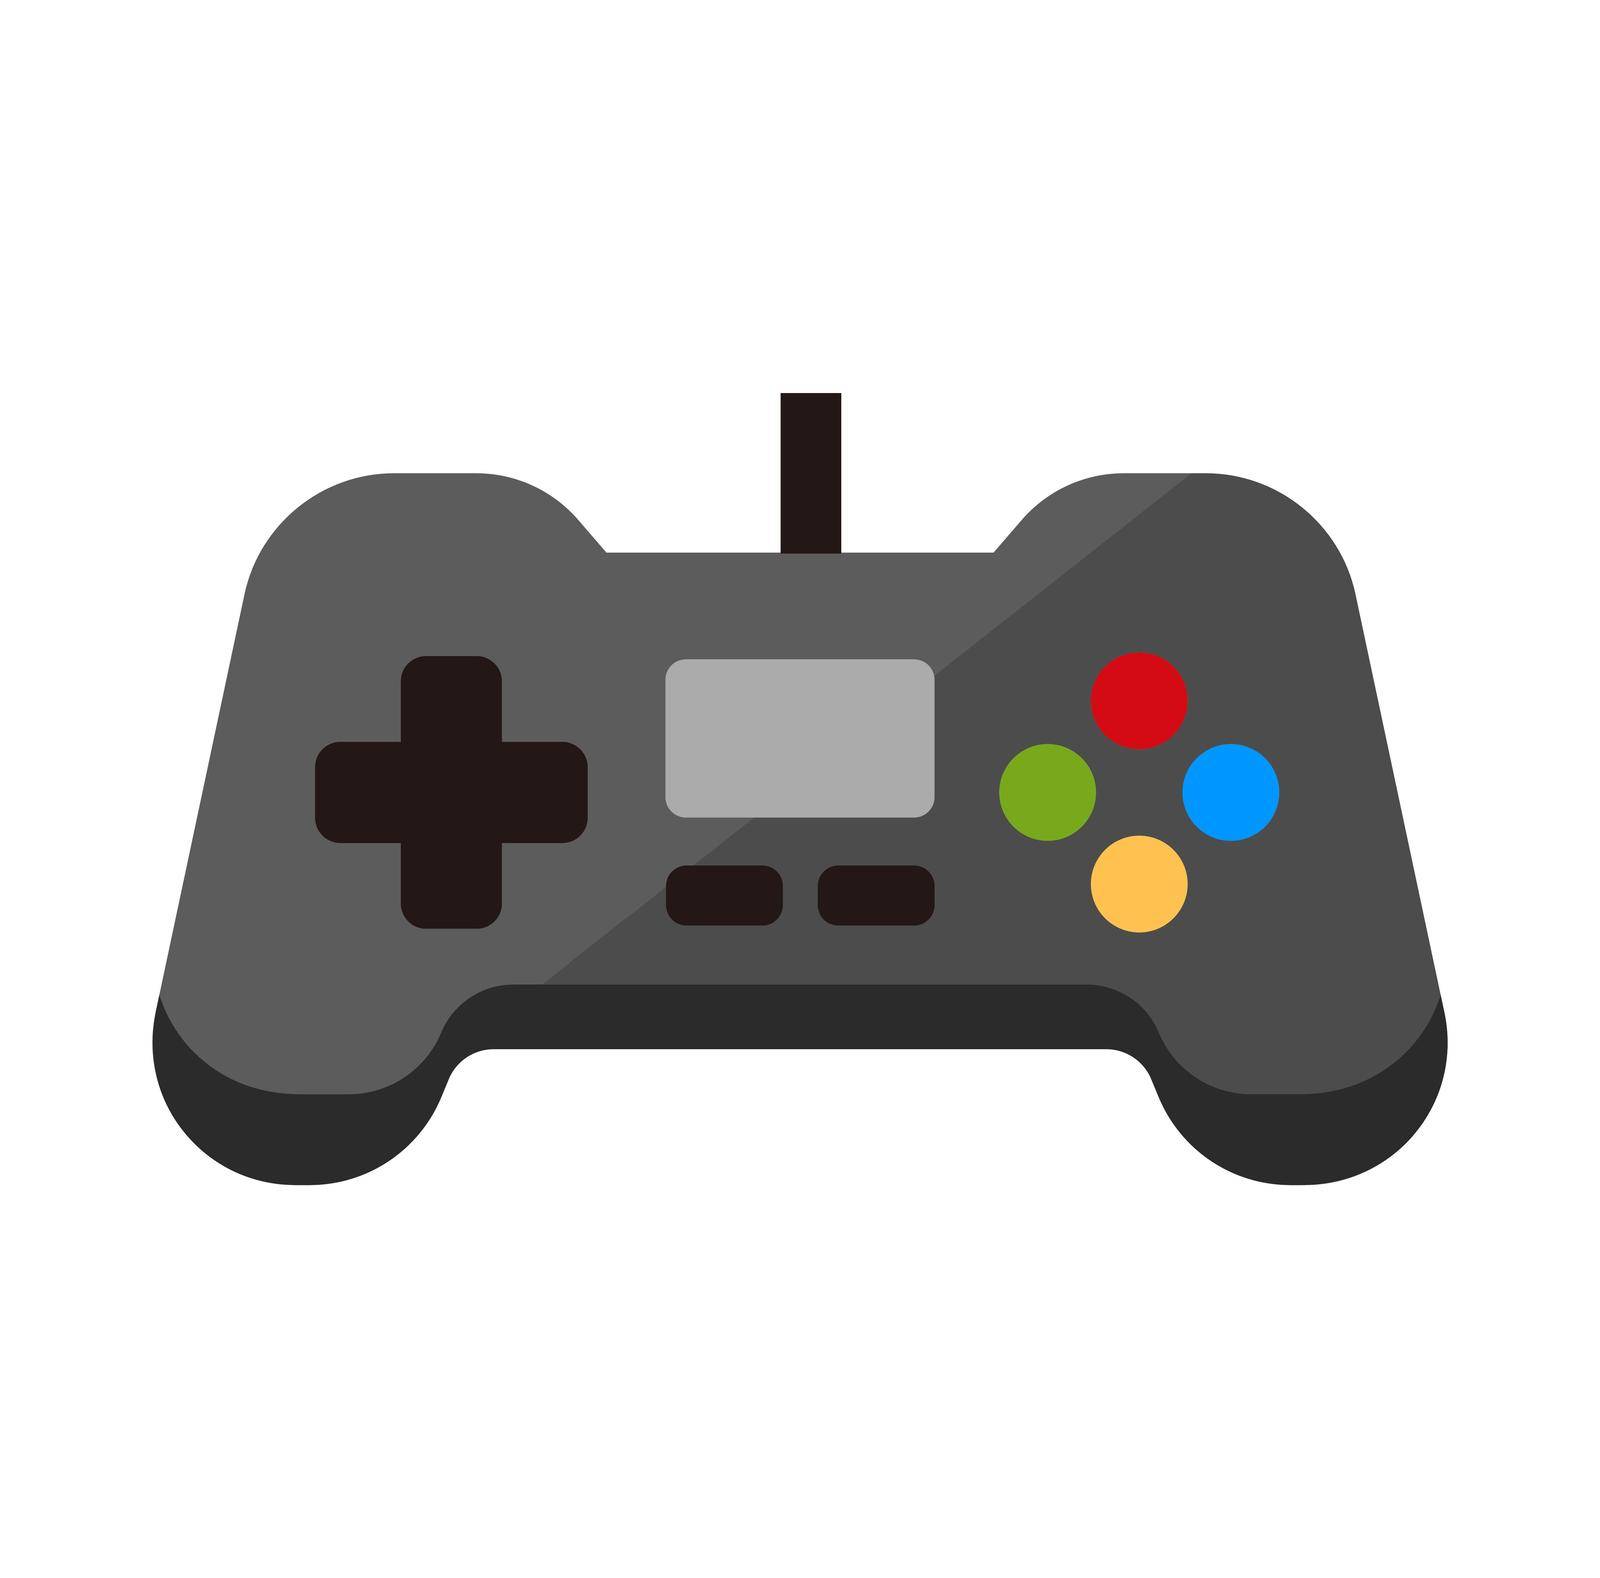 Game Controller, game pad, video game / vector icon illustration